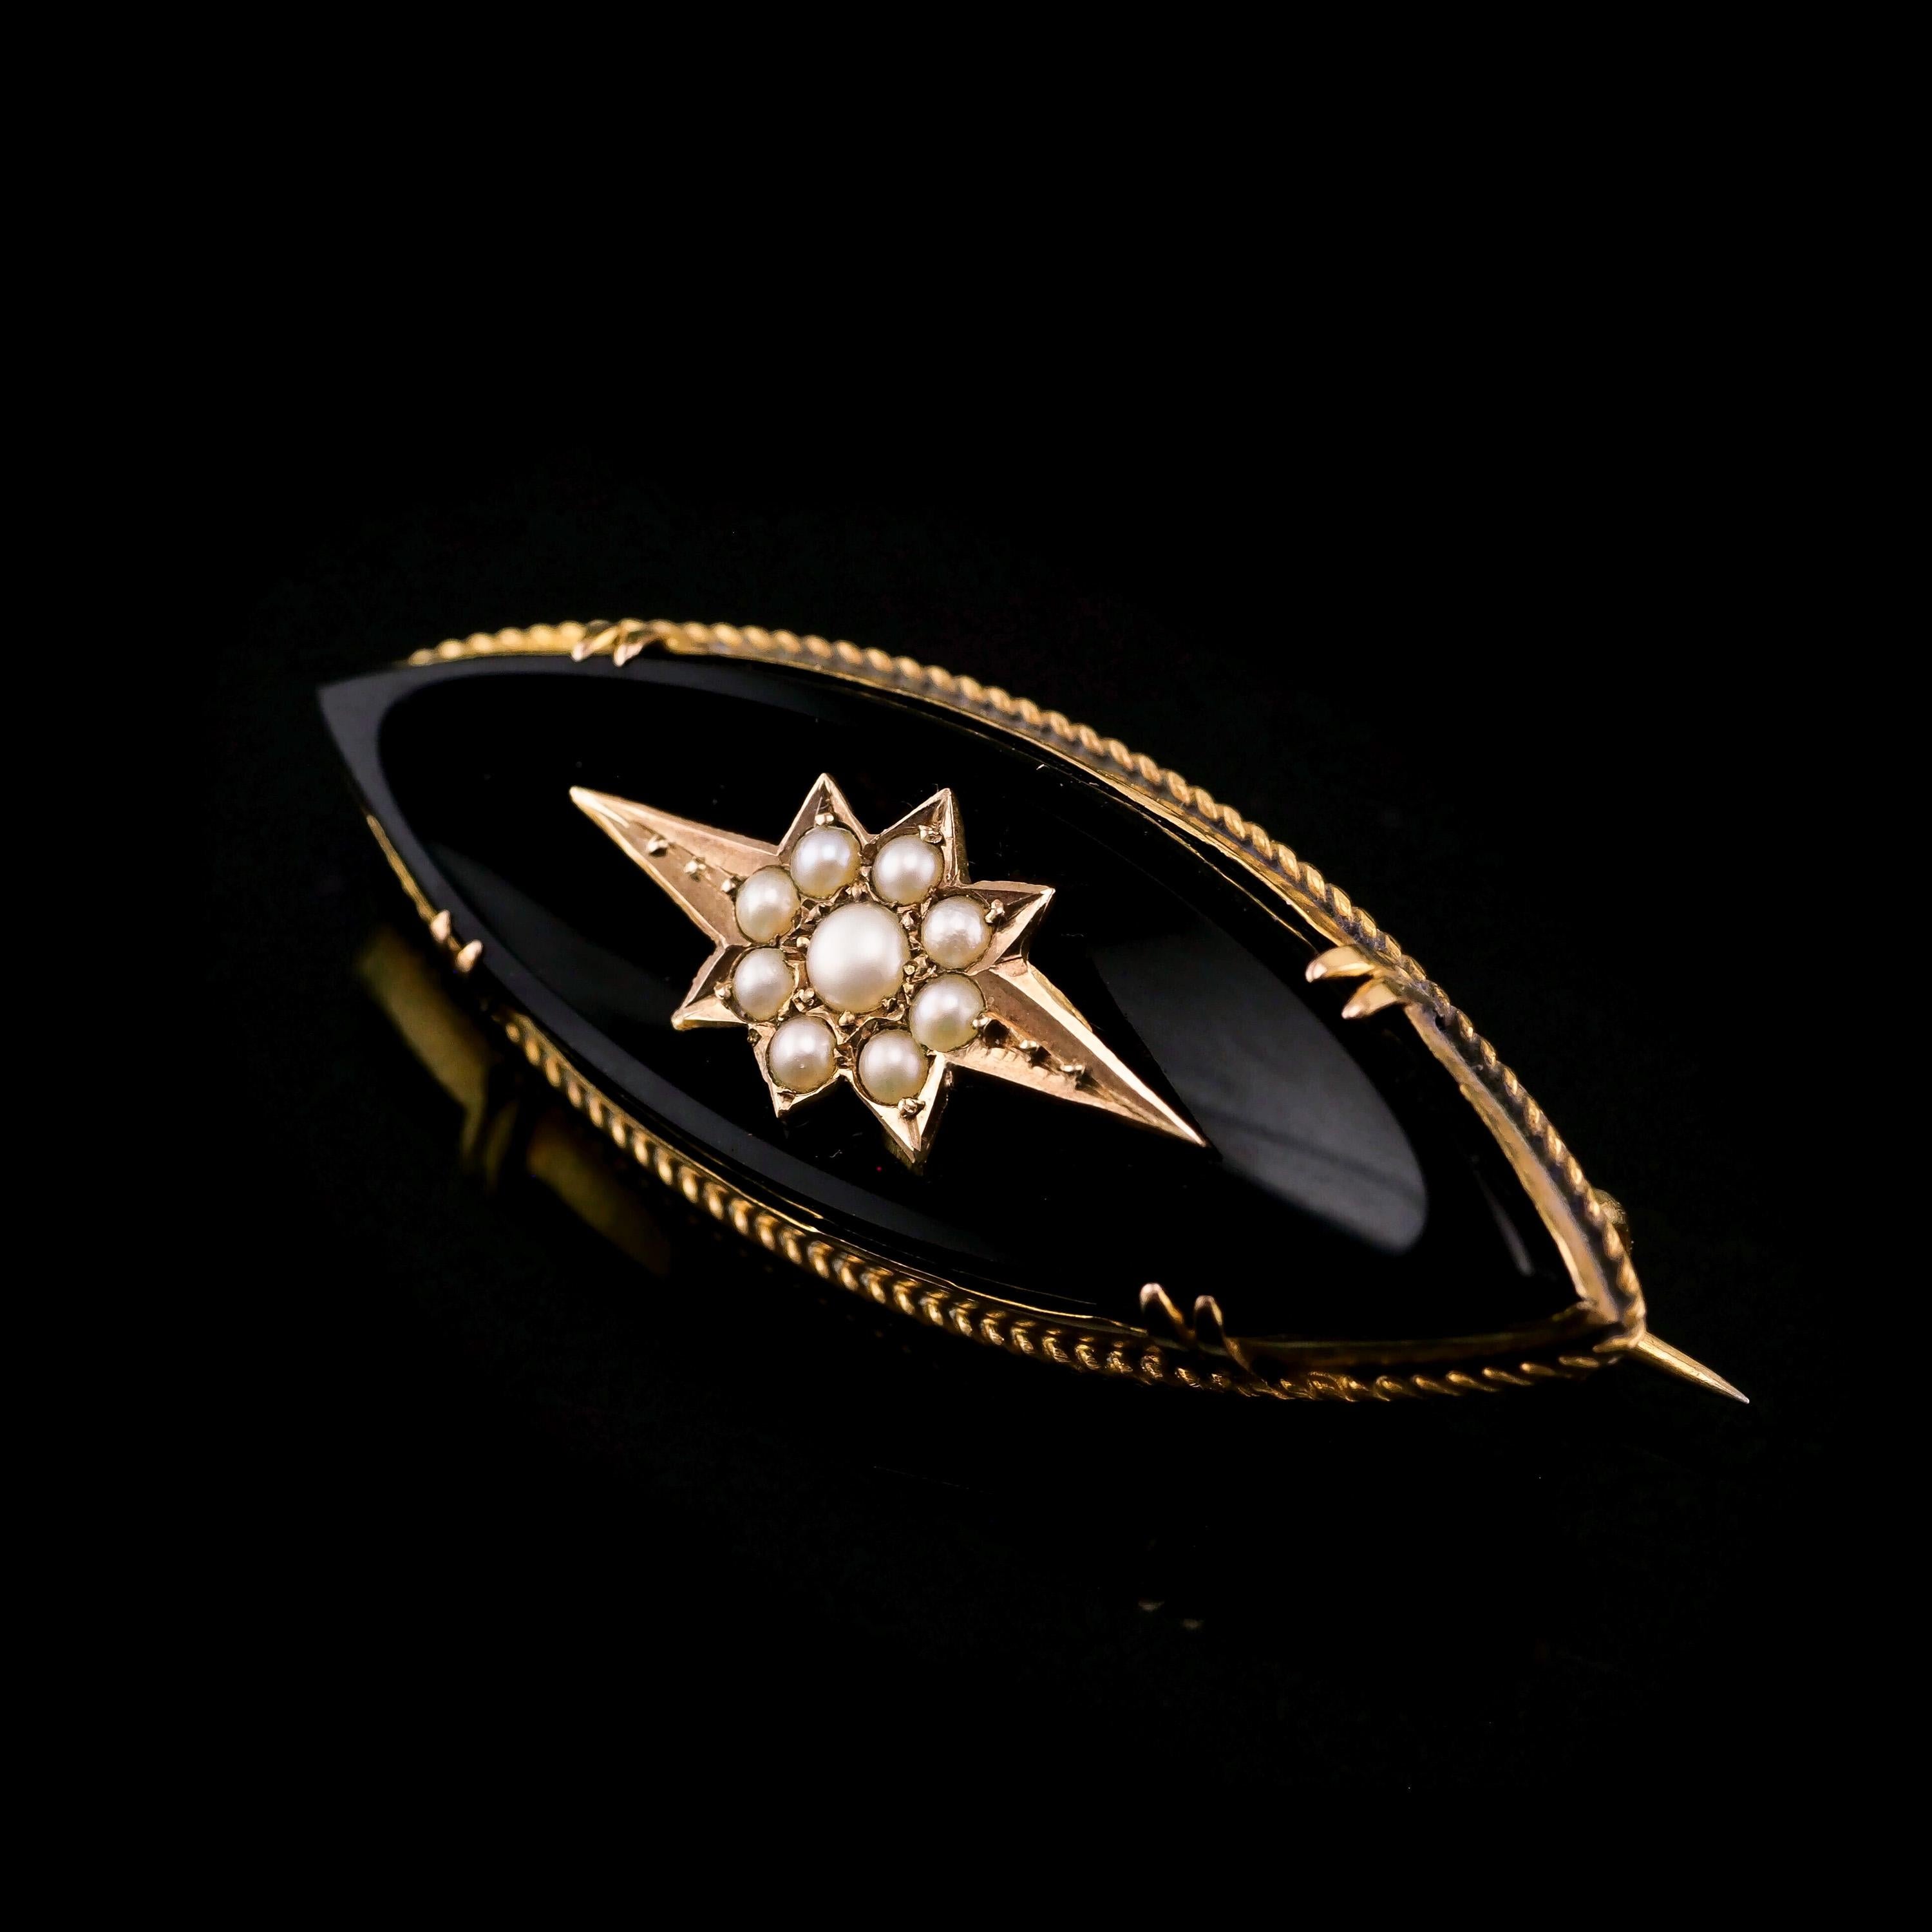 Antique Victorian 18k Gold Onyx & Pearl Star Brooch, circa 1890 For Sale 6